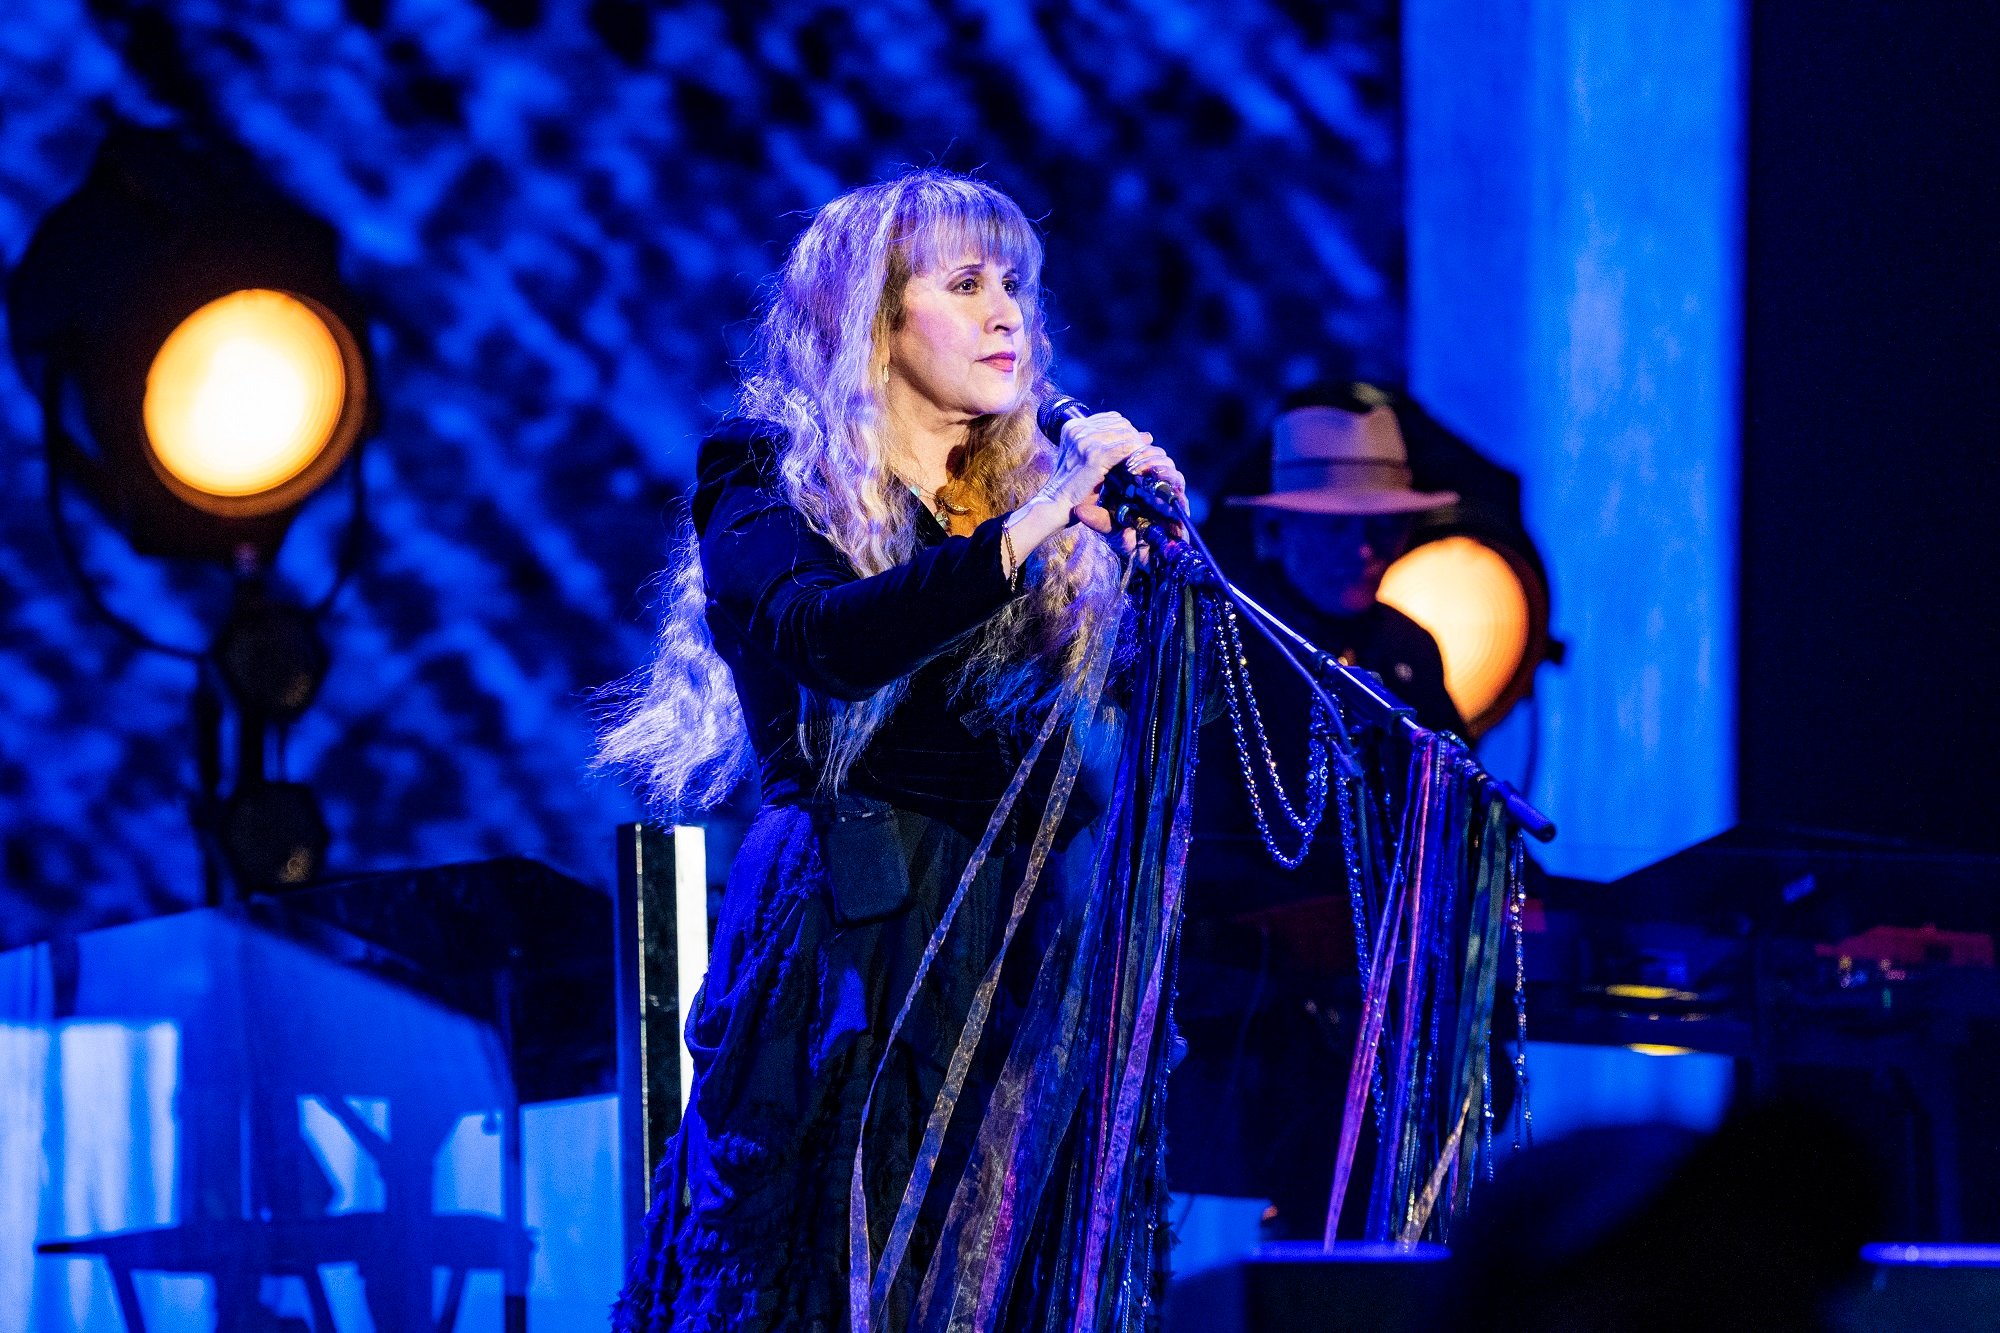 Stevie Nicks holds a microphone stand on stage